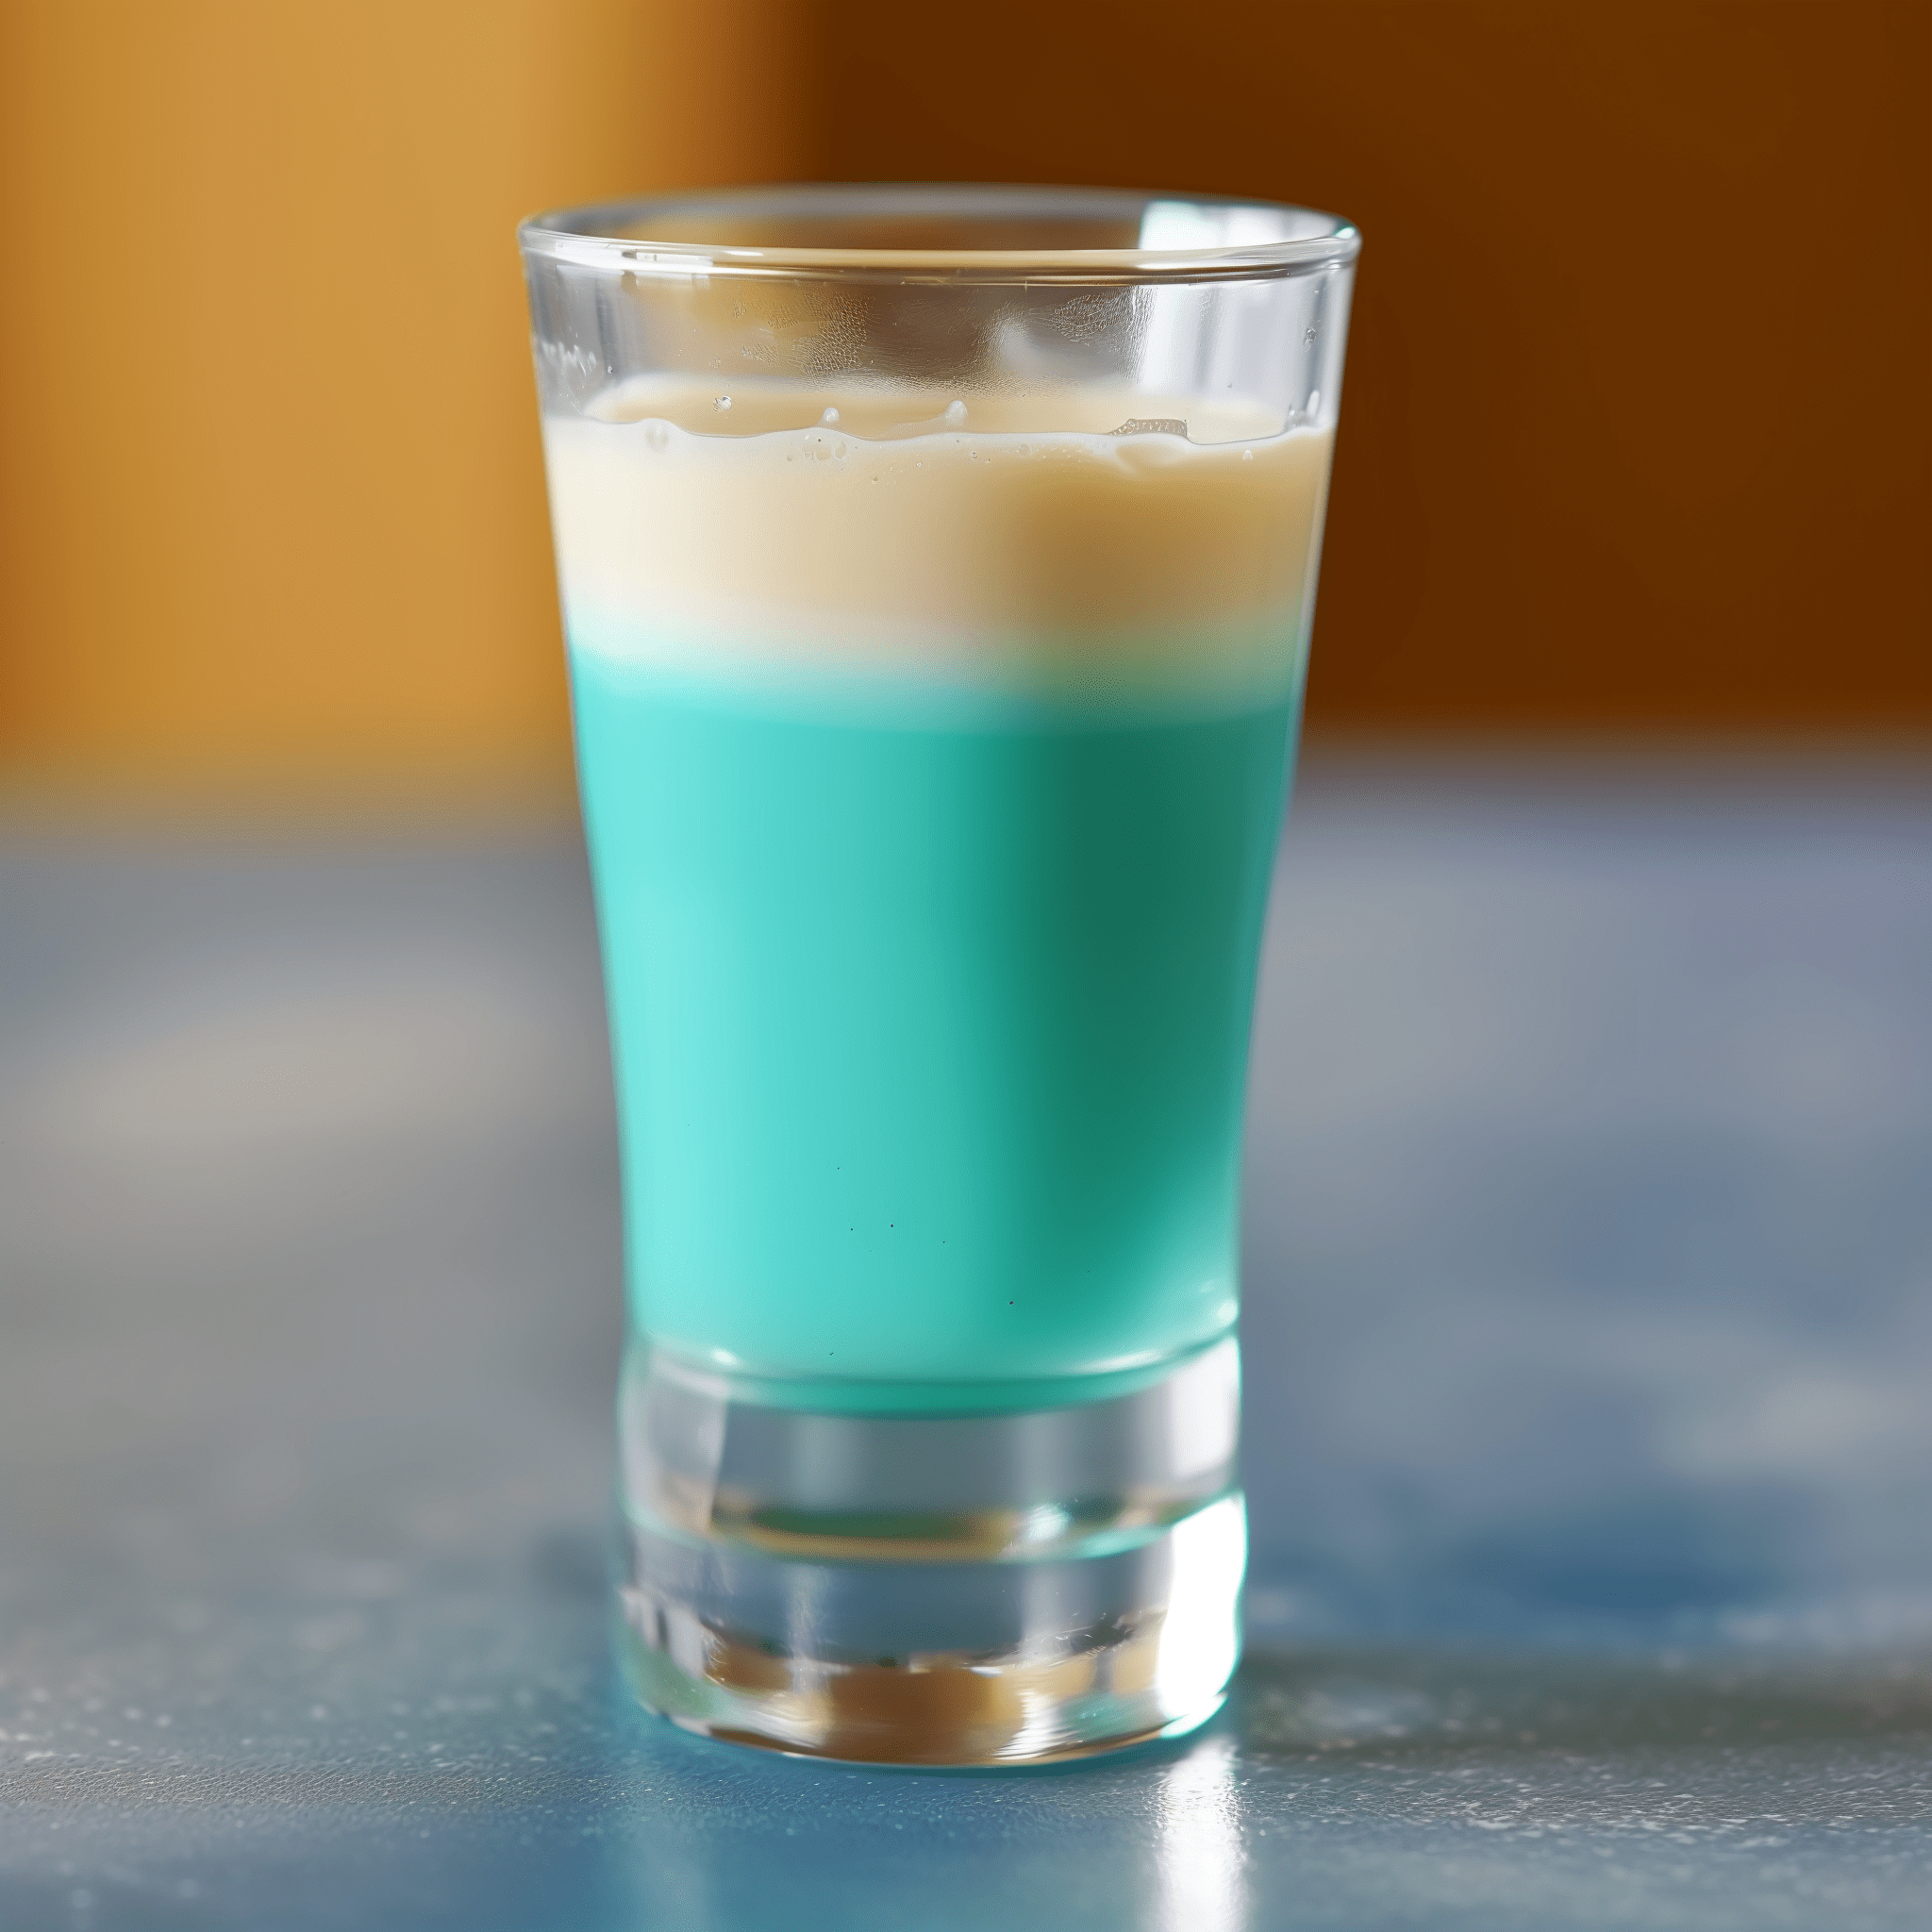 Bazooka Joe Recipe - The Bazooka Joe shot is a delightful blend of sweet and creamy flavors, with a hint of tropical fruitiness from the banana liqueur. The Irish cream adds a smooth texture, while the blue curaçao gives it a playful kick and a vibrant color.